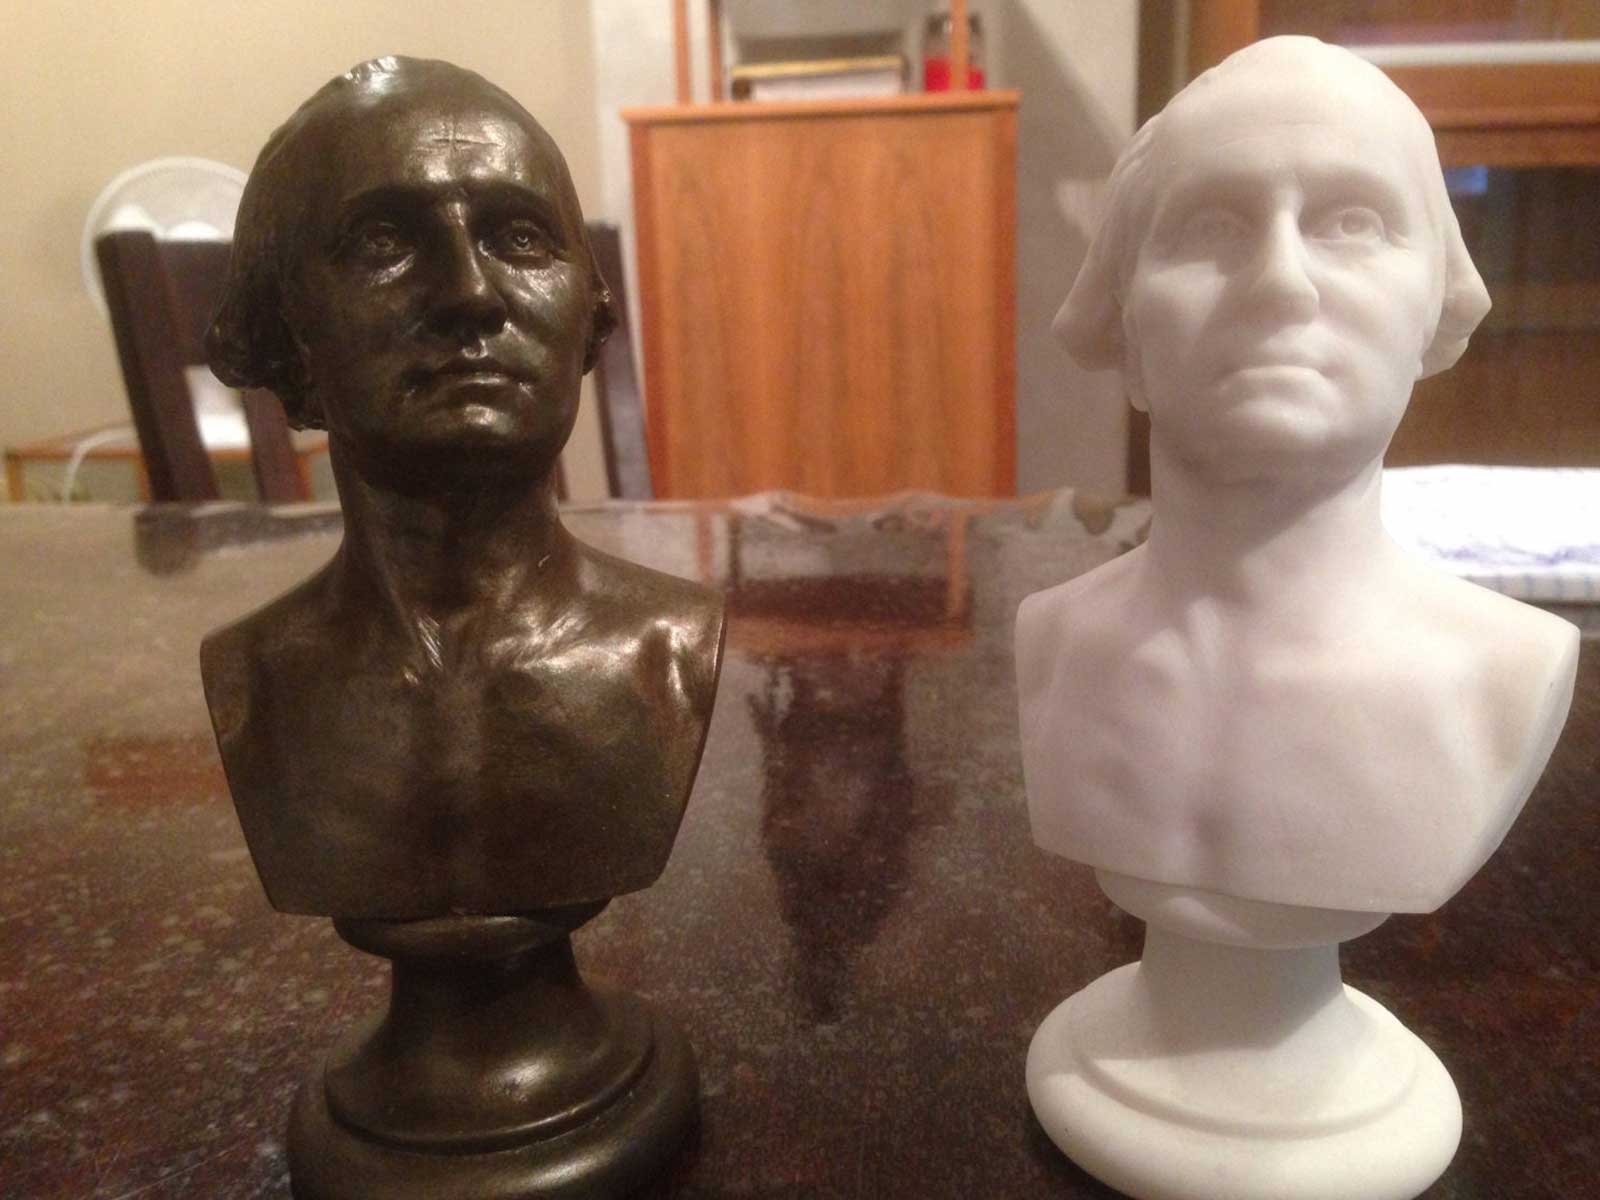 George Washington Mini-Bust: A Tribute to America's First President